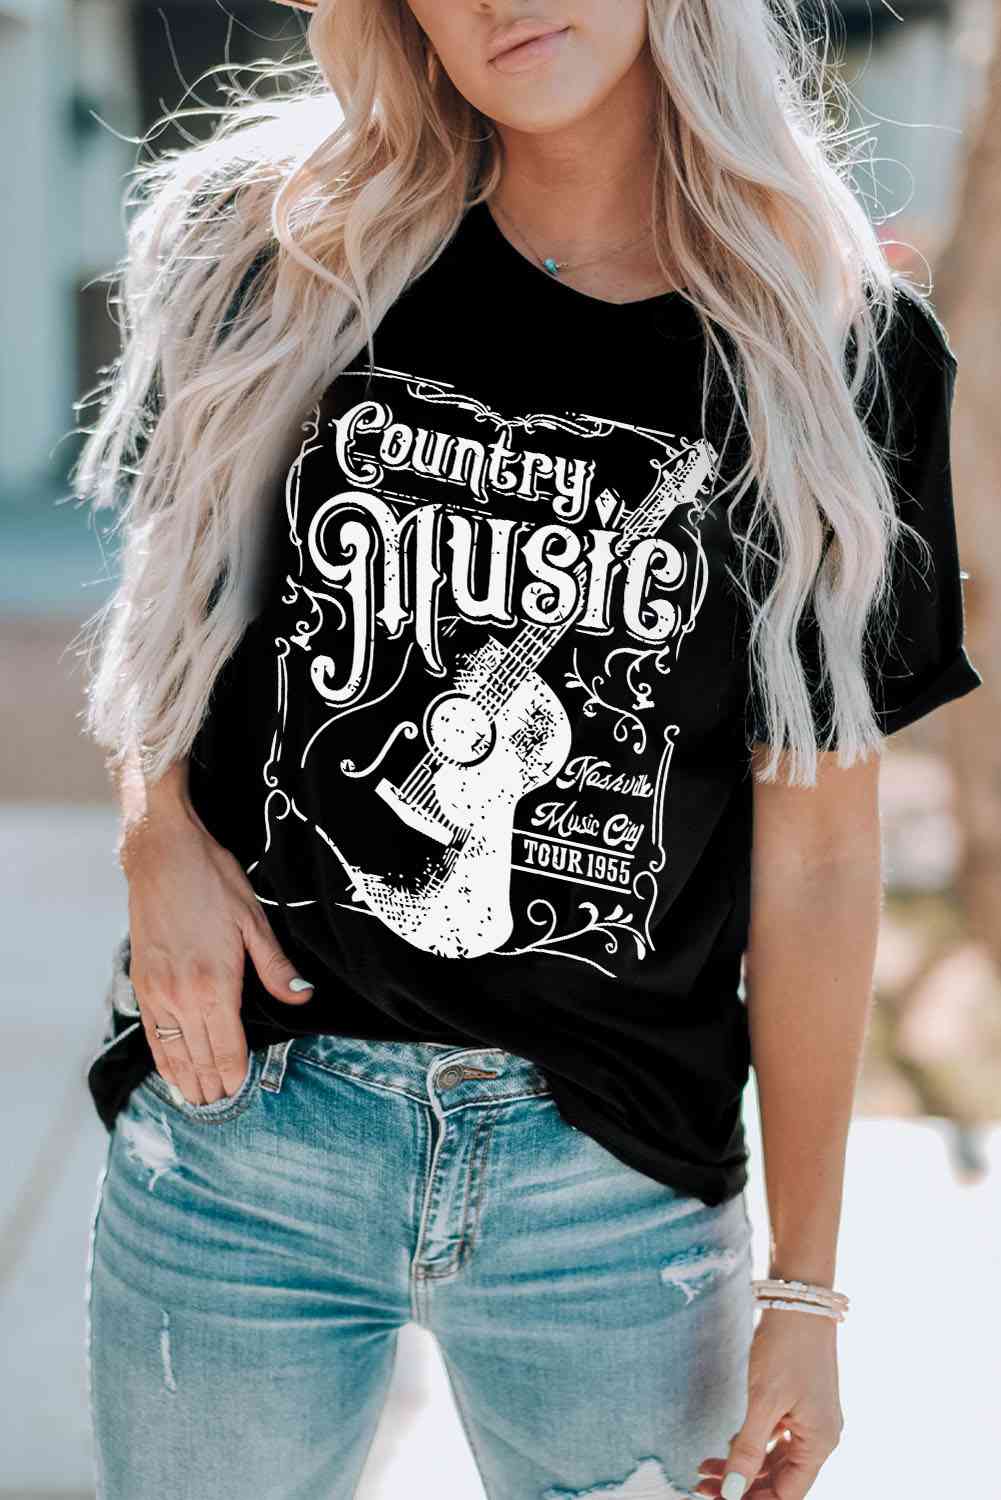 COUNTRY MUSIC Graphic Short Sleeve Tee Shirt Shirts & Tops Krazy Heart Designs Boutique   